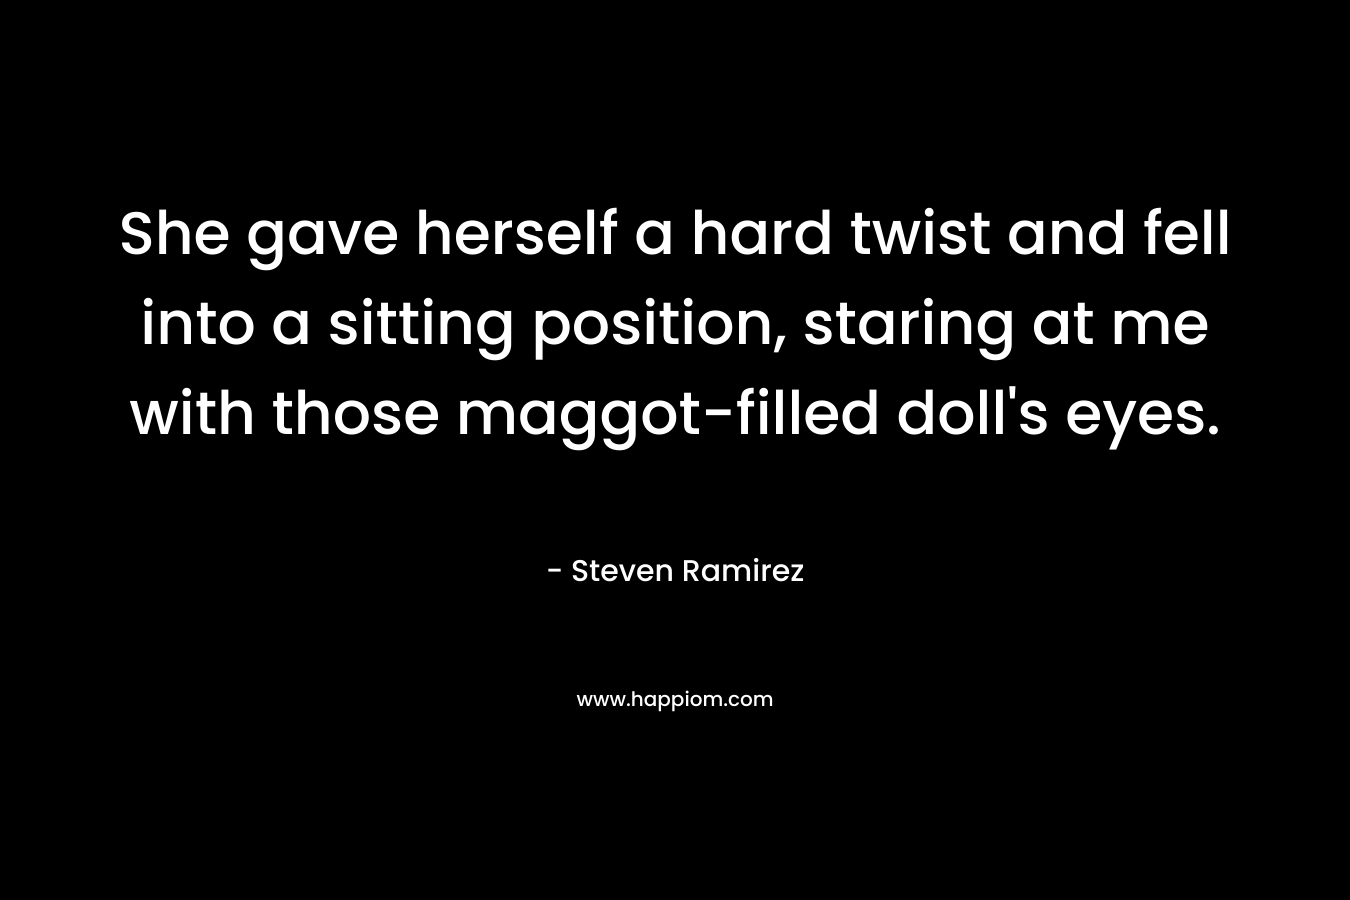 She gave herself a hard twist and fell into a sitting position, staring at me with those maggot-filled doll's eyes.